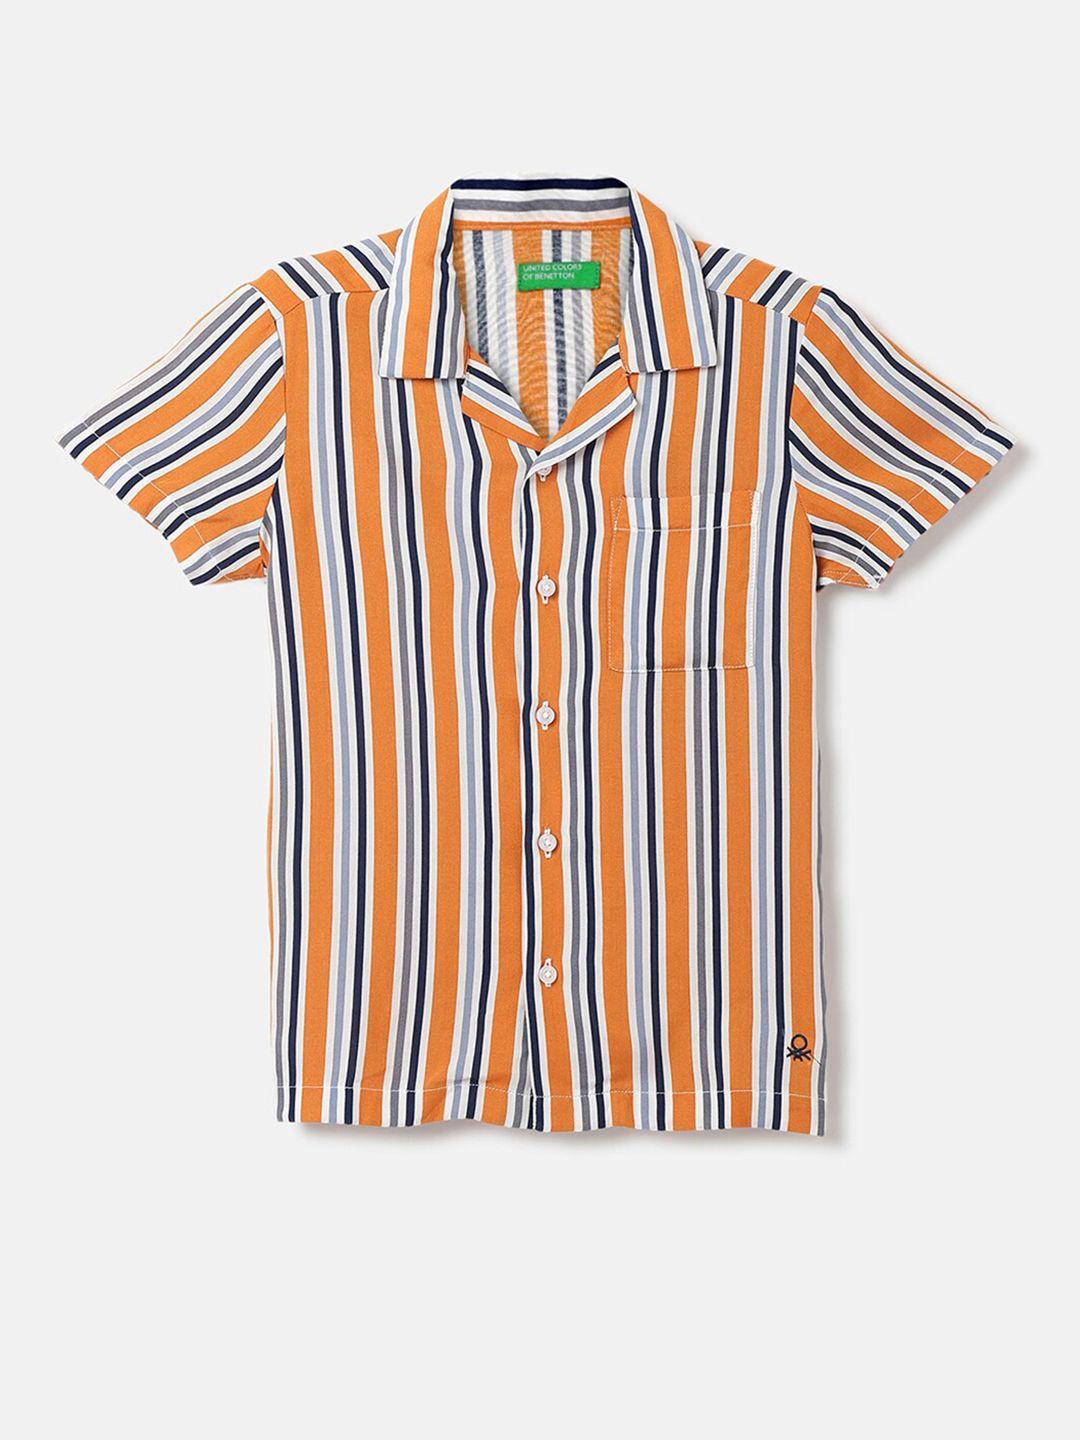 united-colors-of-benetton-boys-striped-casual-shirt